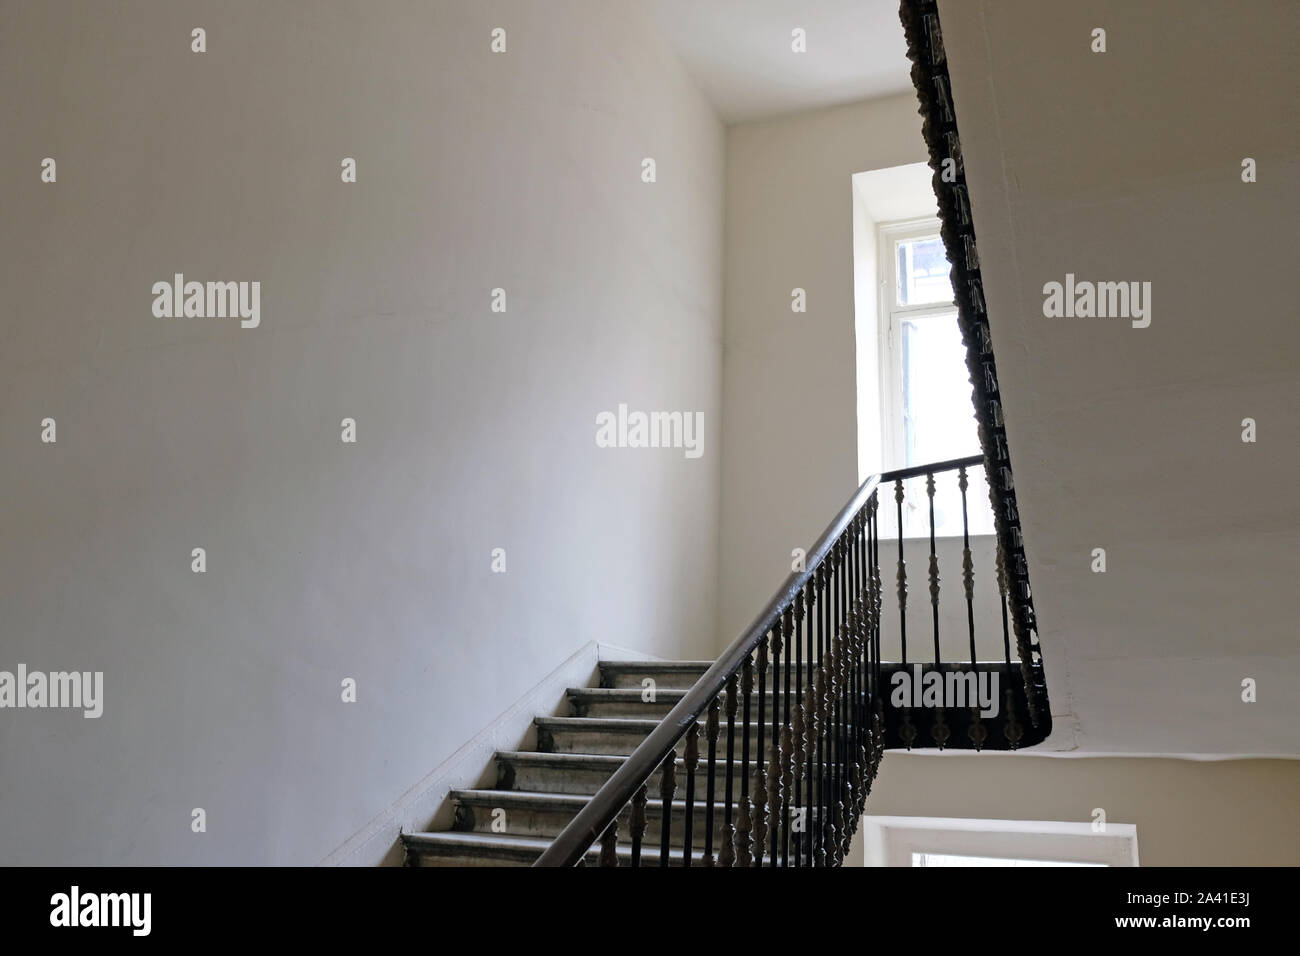 Staircase in the entrance of the house. White walls, railings in the stairwell and steps up. Stock Photo